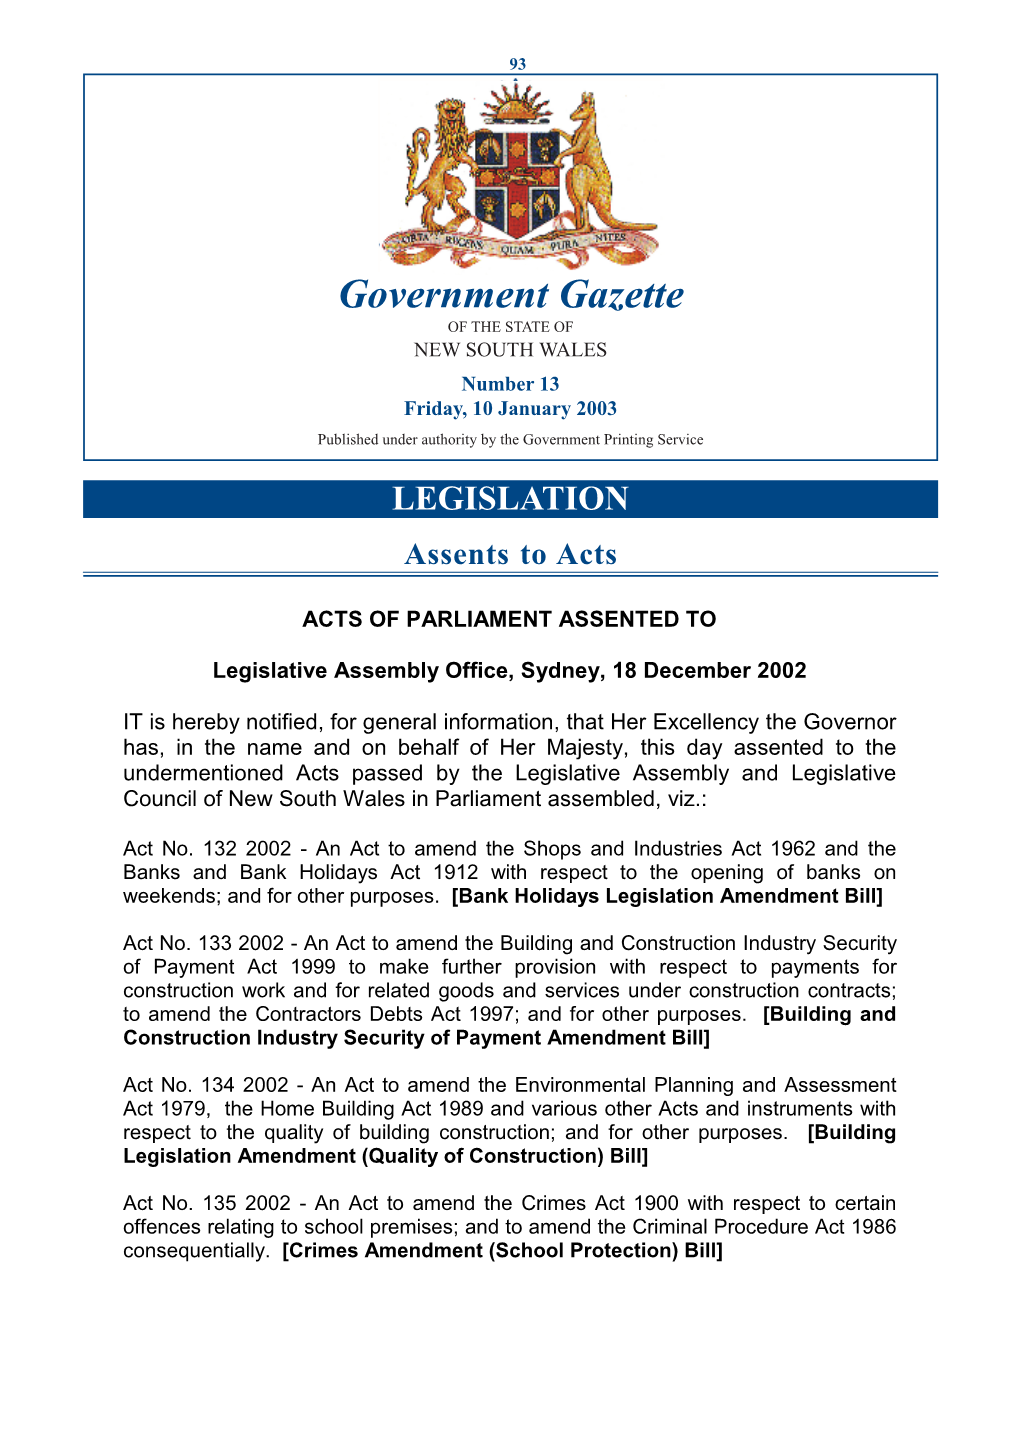 Government Gazette of the STATE of NEW SOUTH WALES Number 13 Friday, 10 January 2003 Published Under Authority by the Government Printing Service